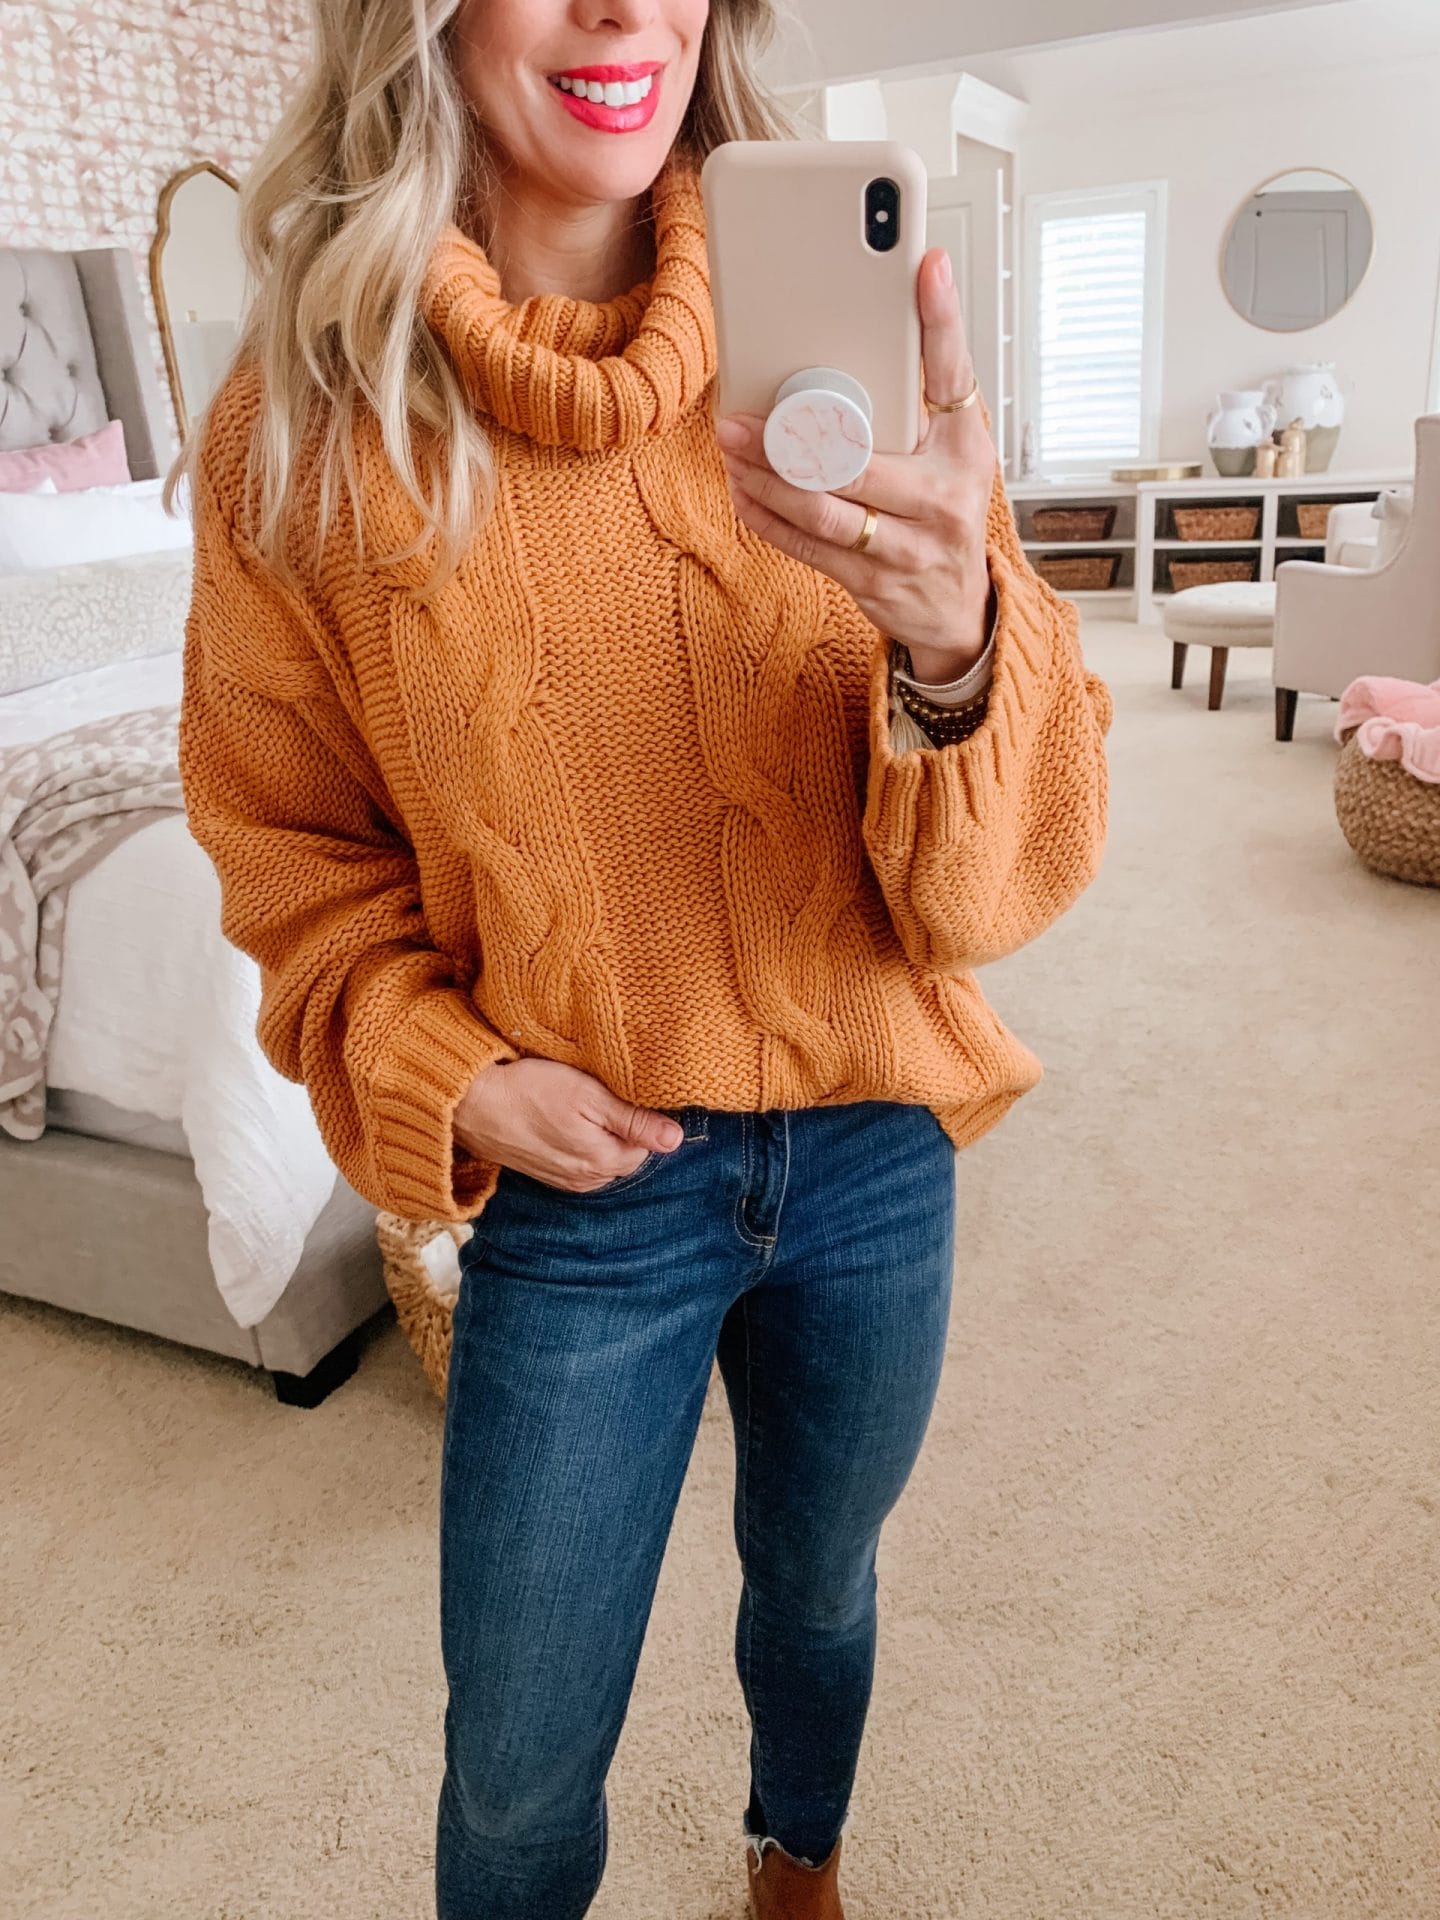 Amazon Fashion Faves, Cable Knit Sweater, Jeans, Booties 